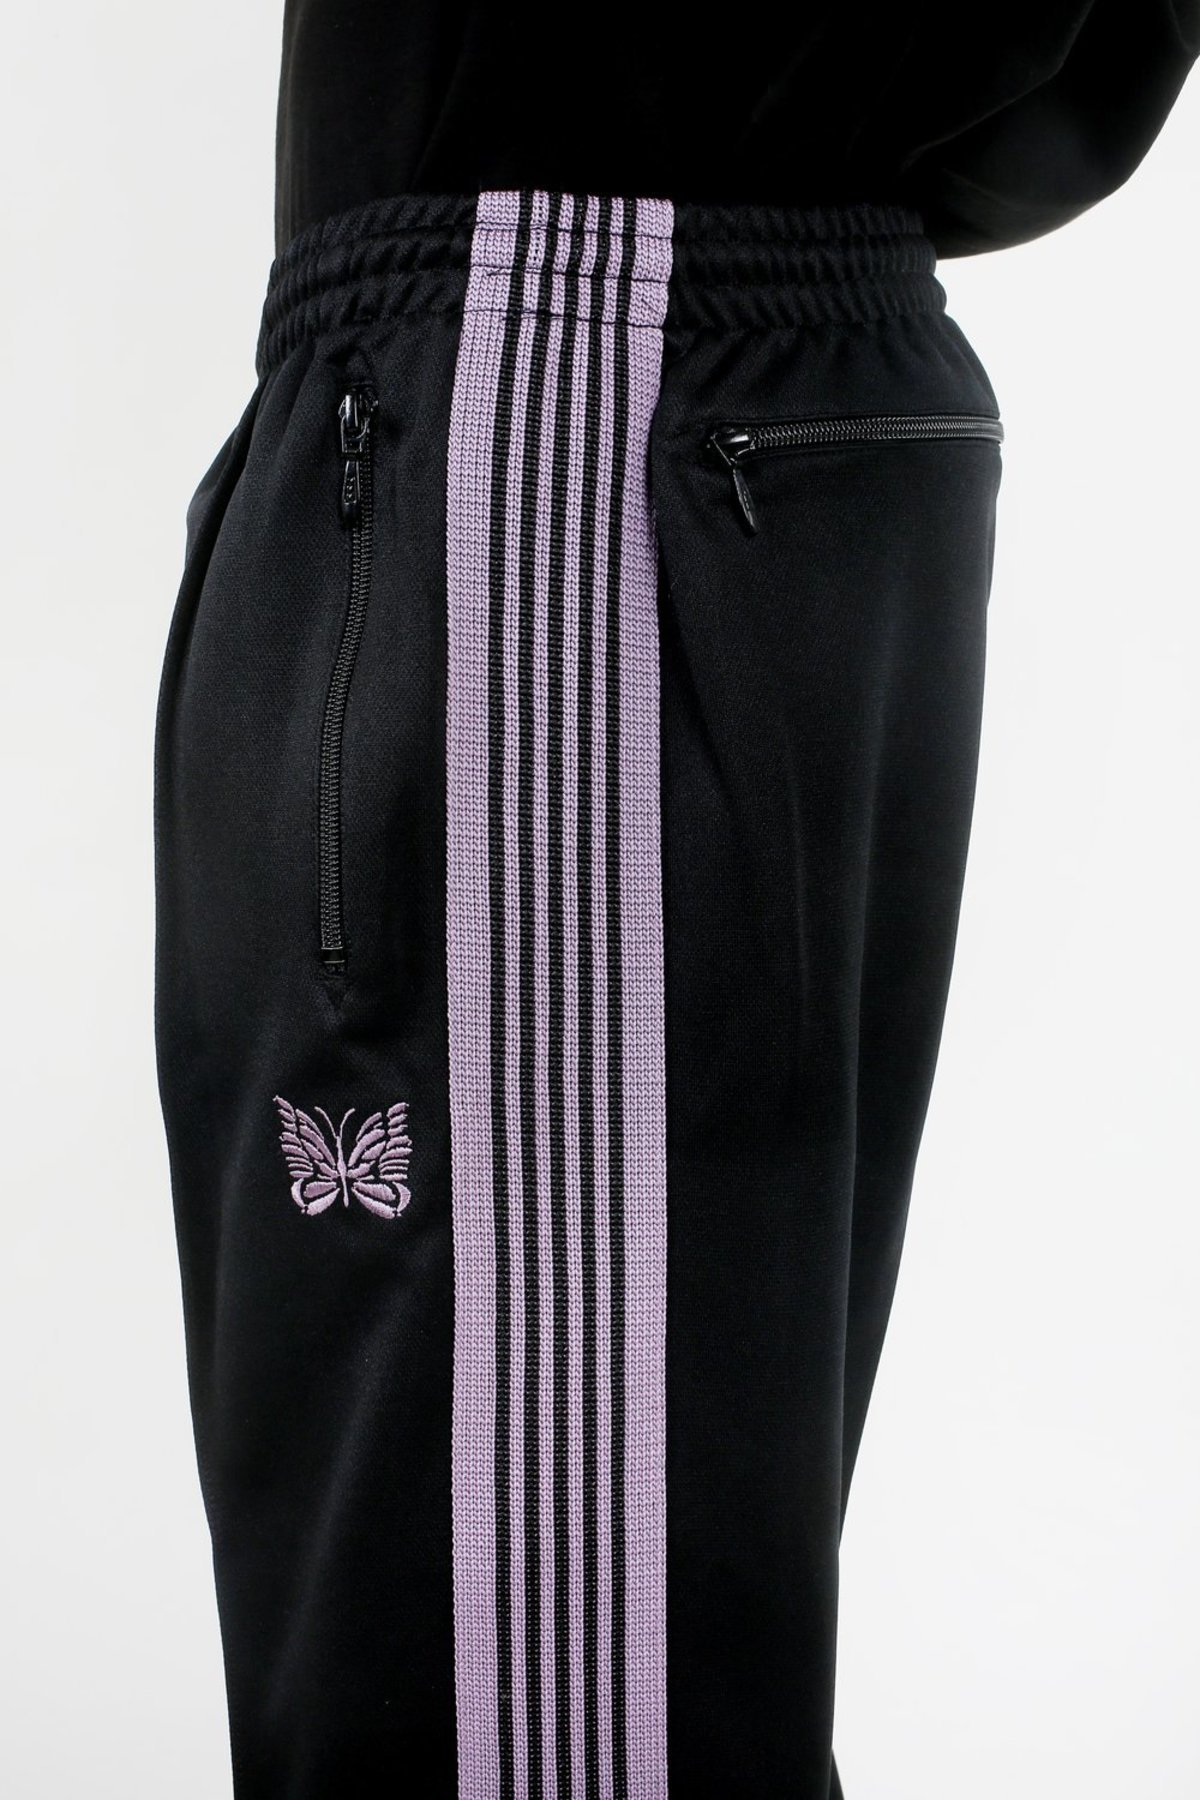 Butterfly logo on Needles track pants is inspired